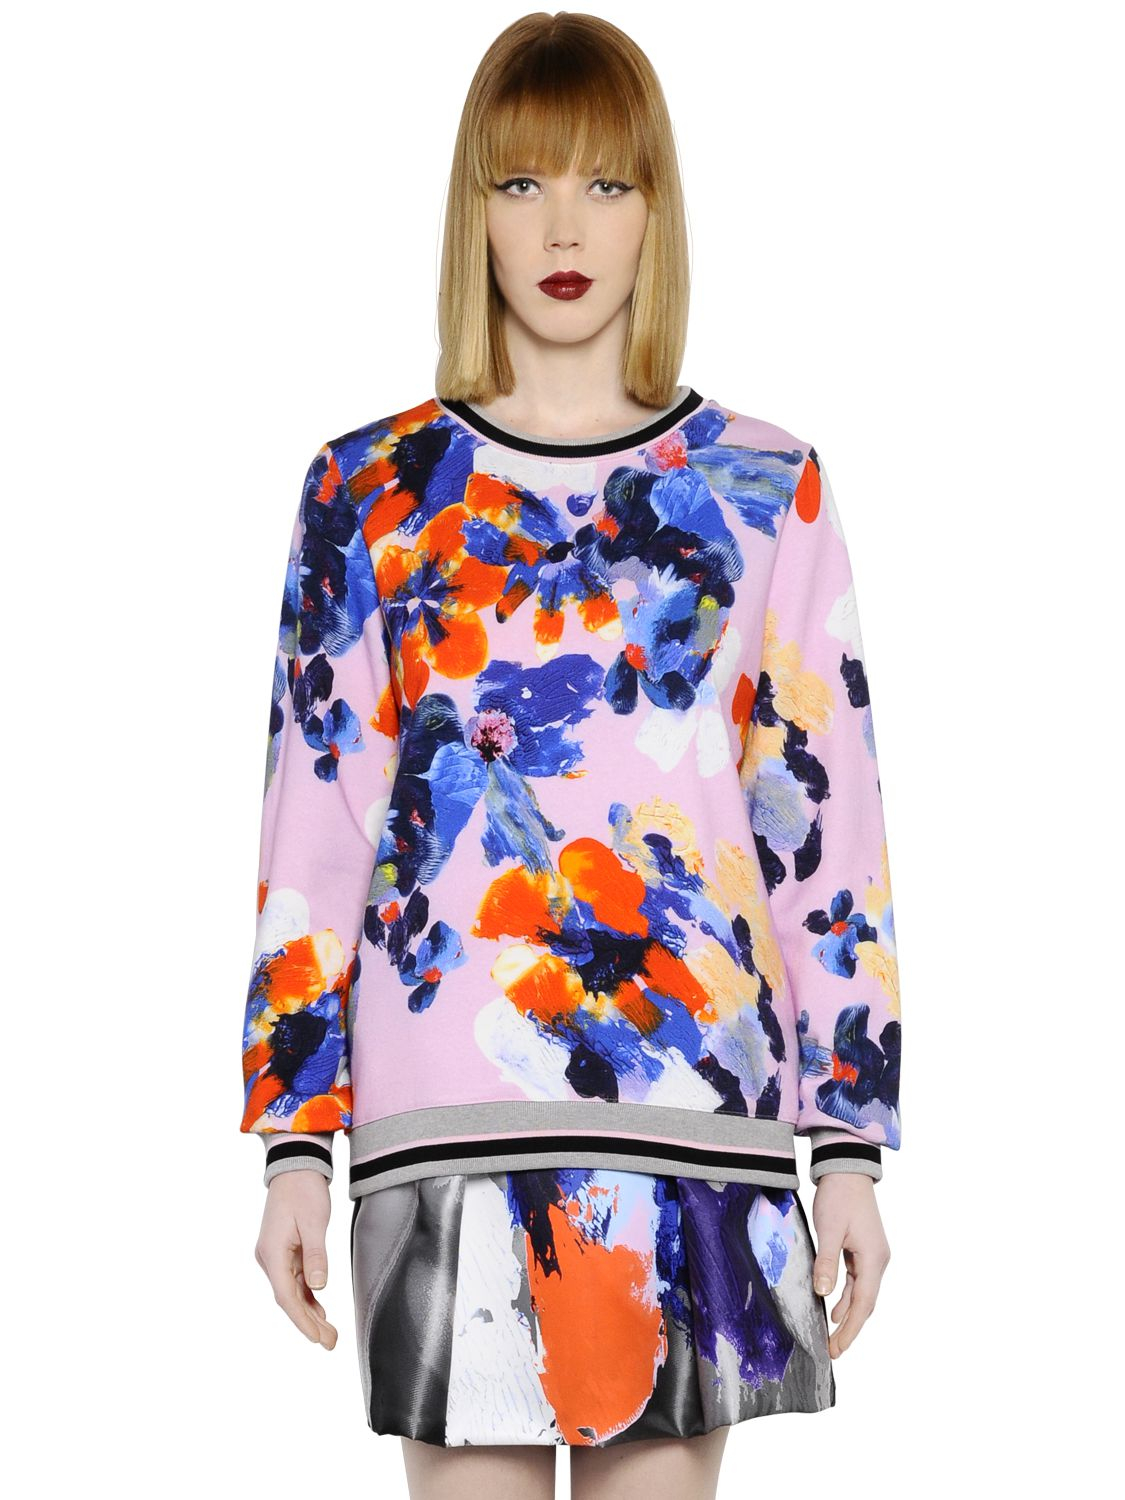 Msgm Floral Printed Cotton Sweatshirt in Blue | Lyst